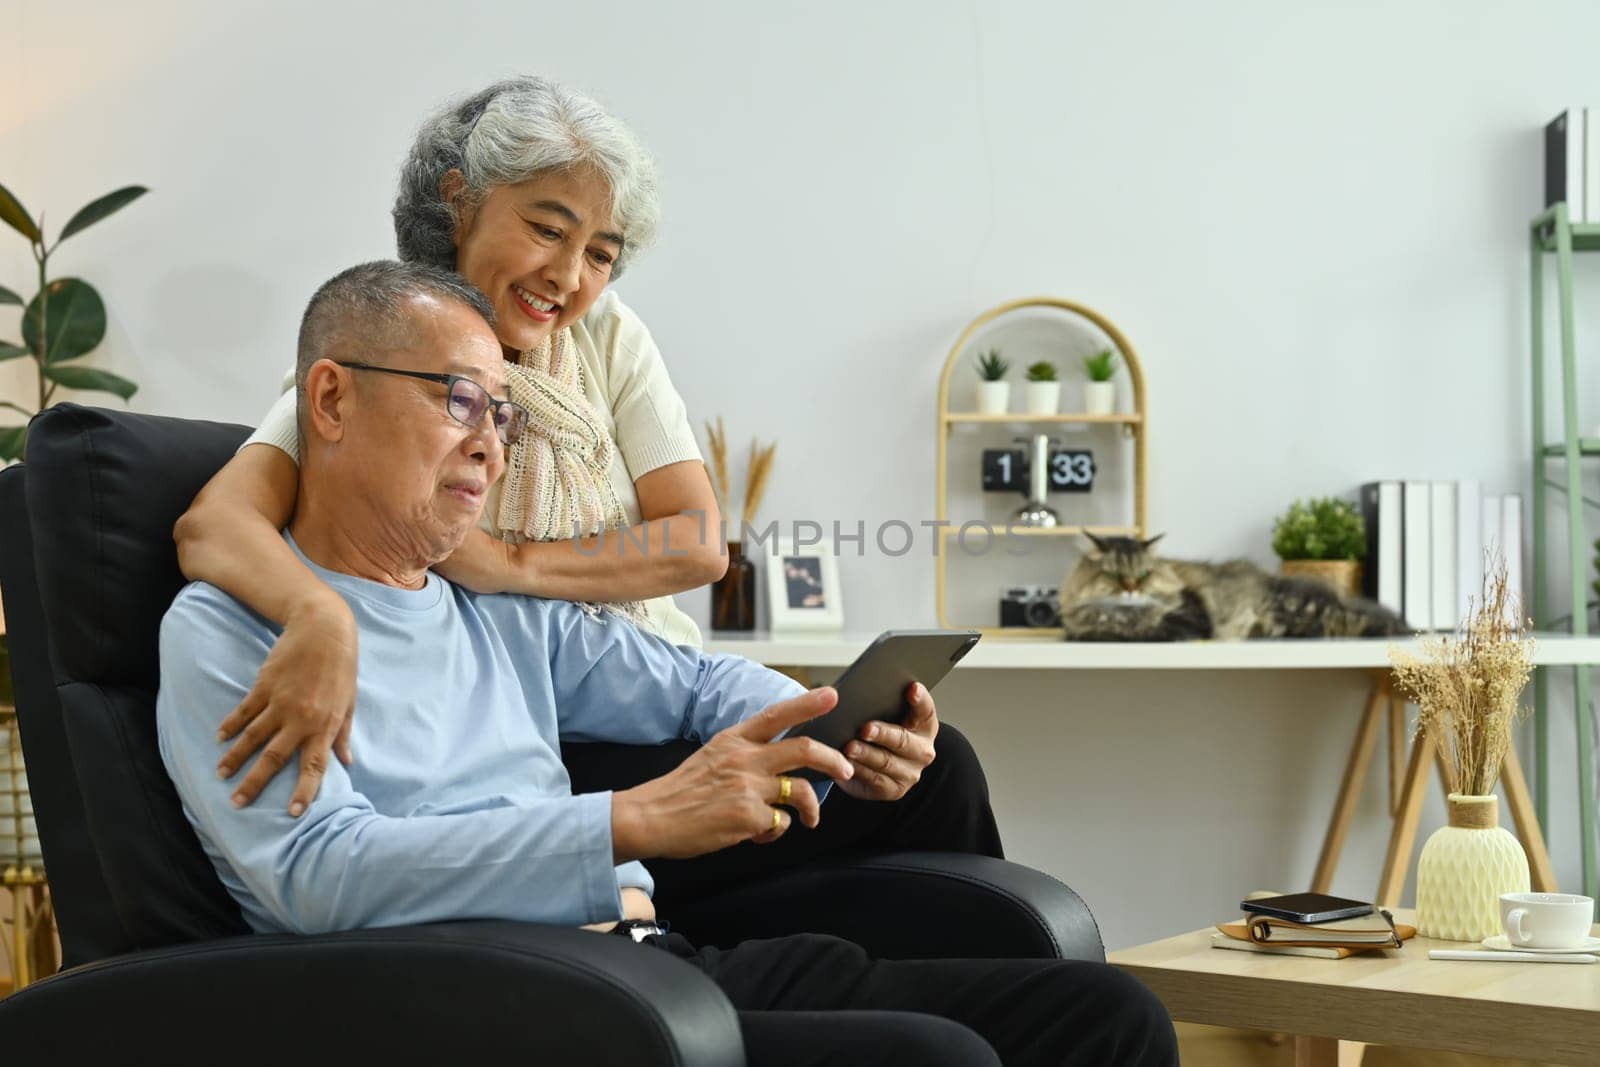 Smiling elderly woman talking to her husband in the living room. Retirement lifestyle concept.